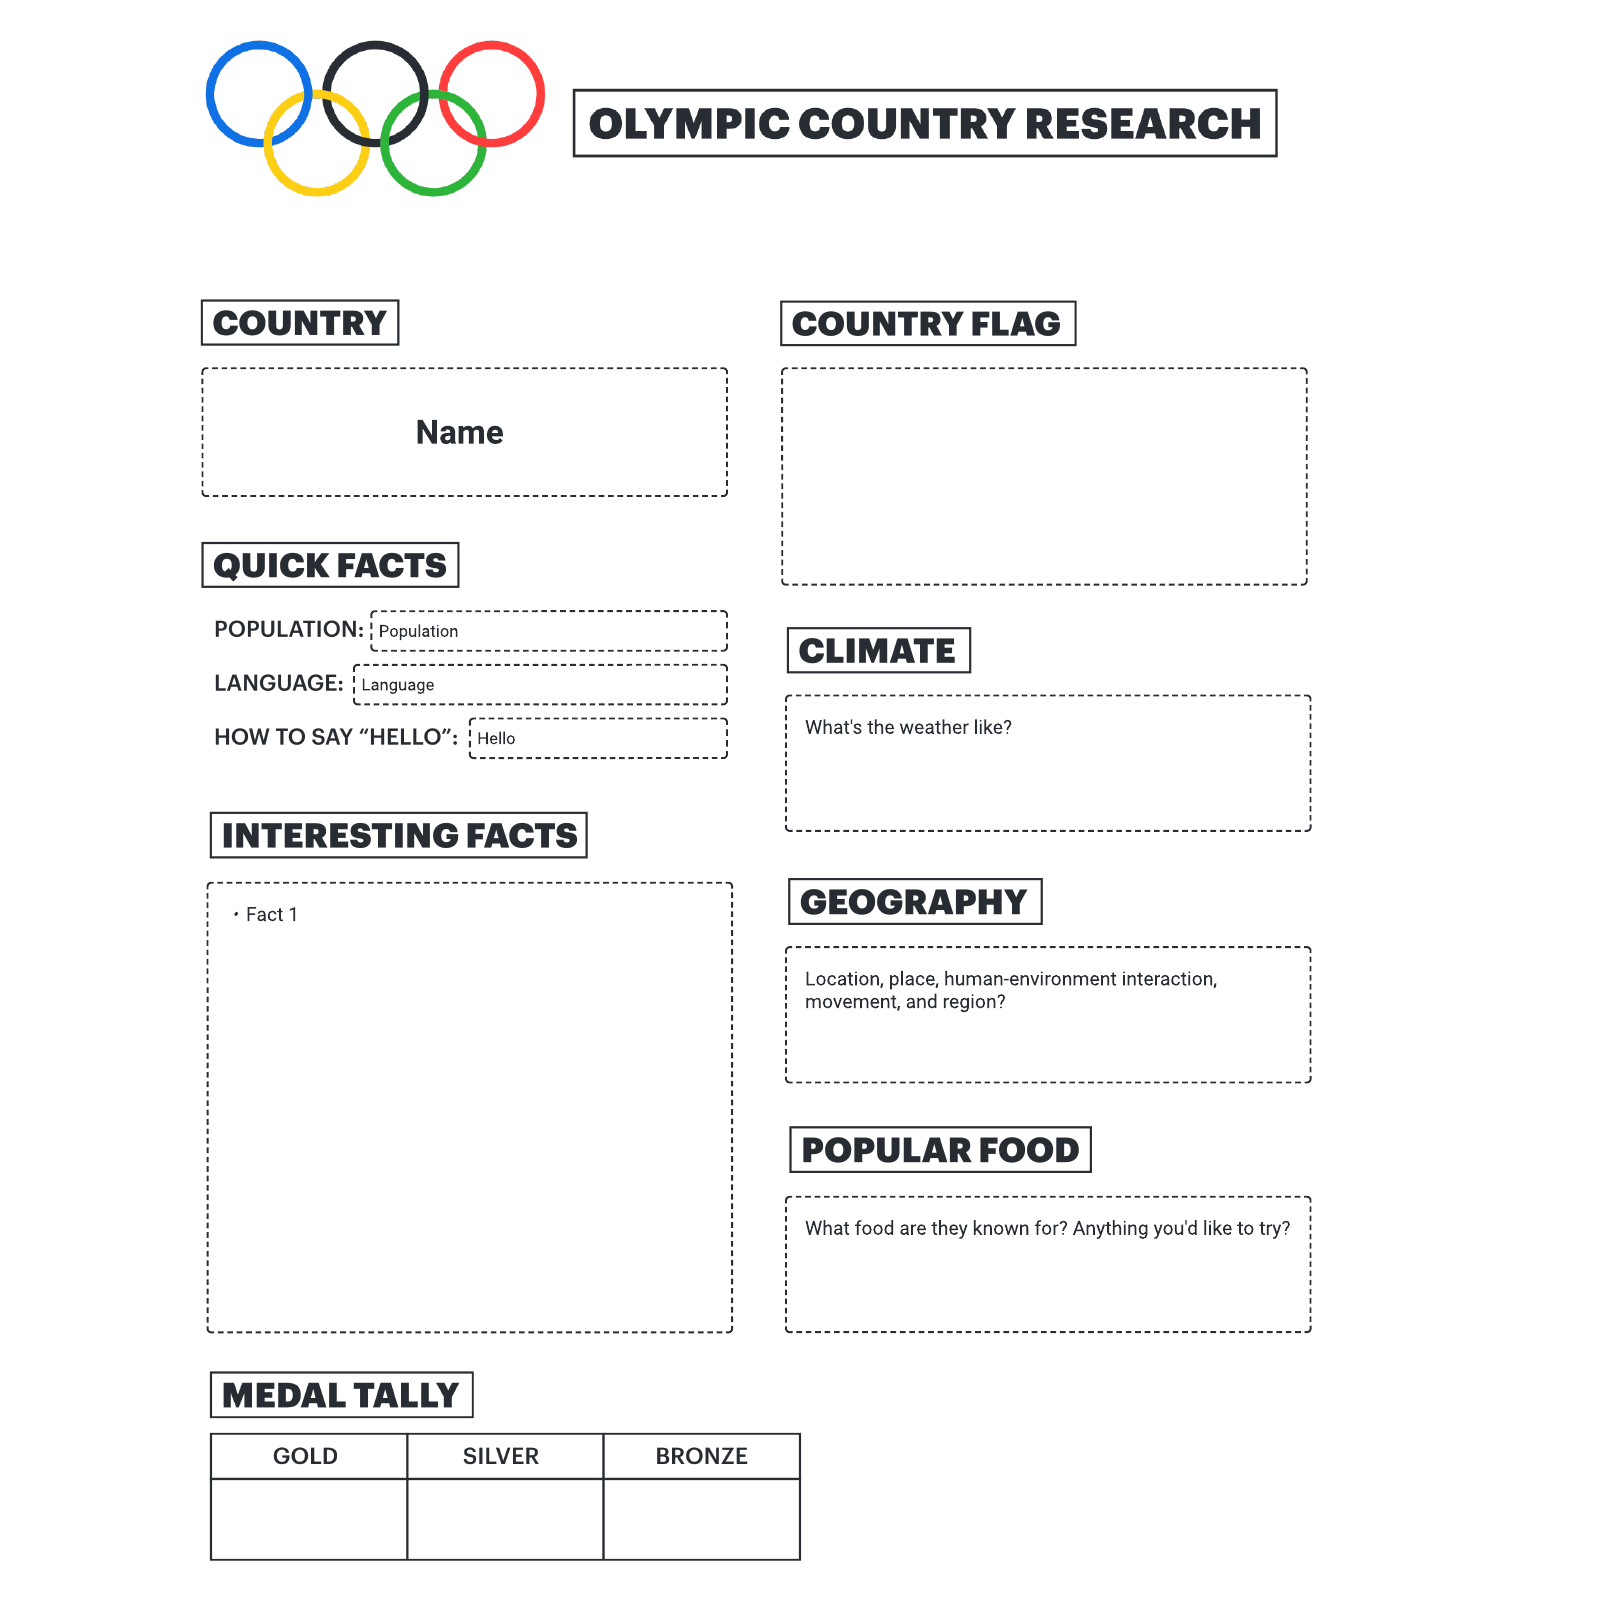 Olympic country research example